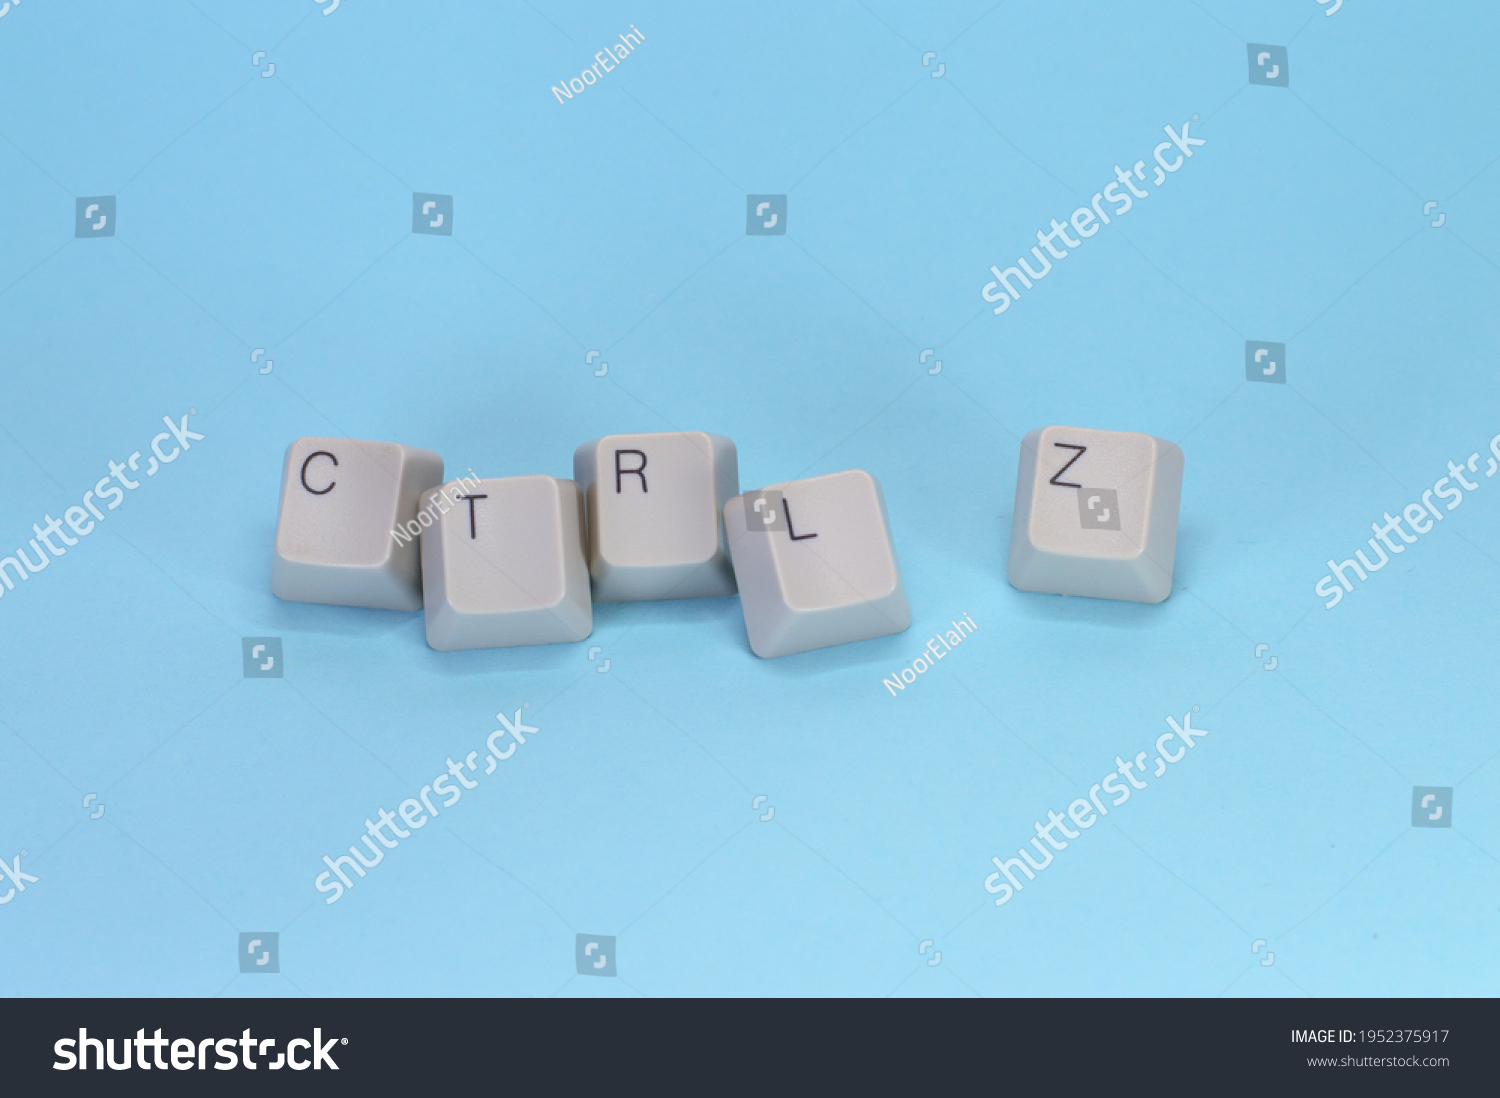 The CTRL +Z key for the shortcut of undo which used in Microsoft Windows application. The if some transaction have don wrongly we easily correct from that. #1952375917